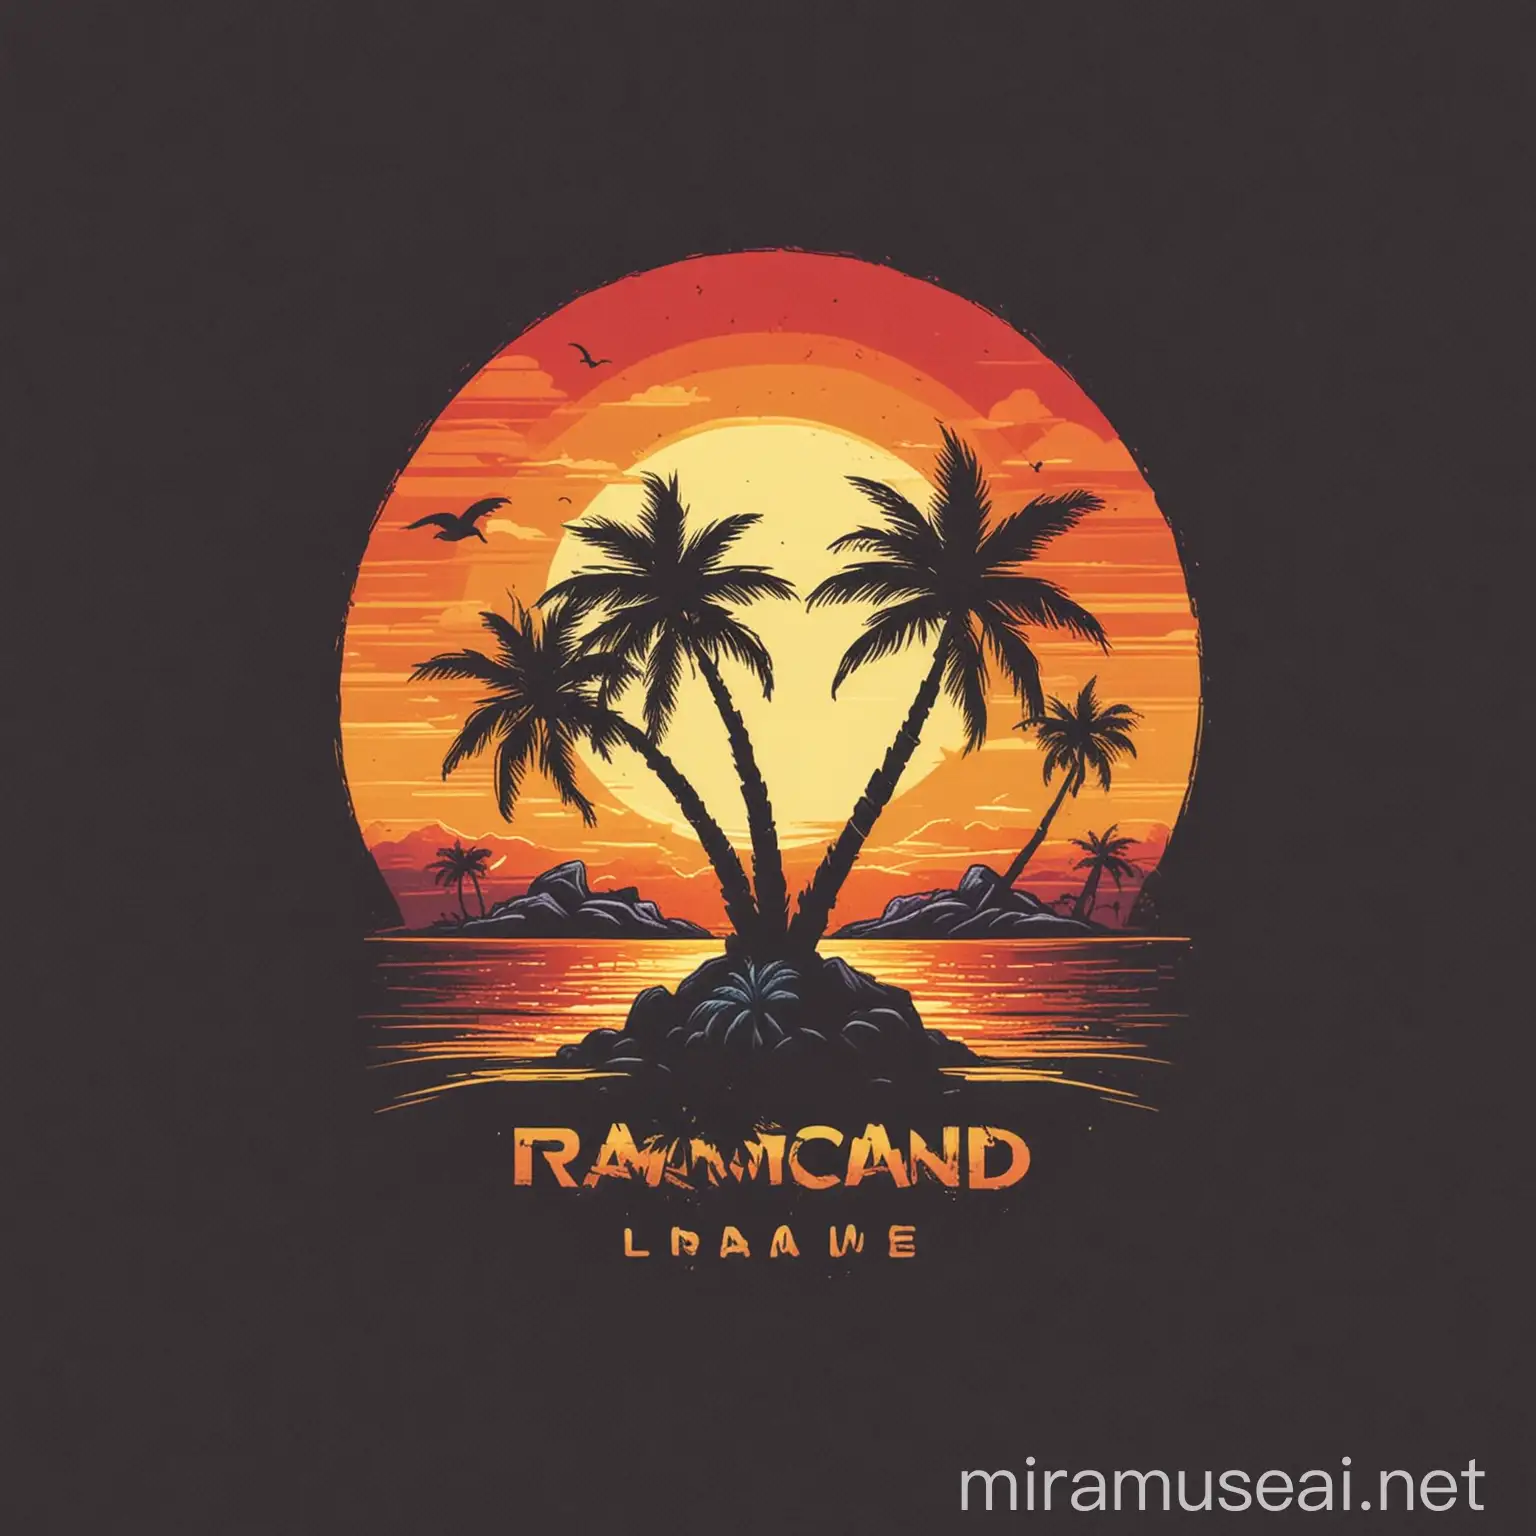 fun logo with island and two palm trees at sunset, palm trees must be black, use tones of red orange yellow and blue, t shirt print